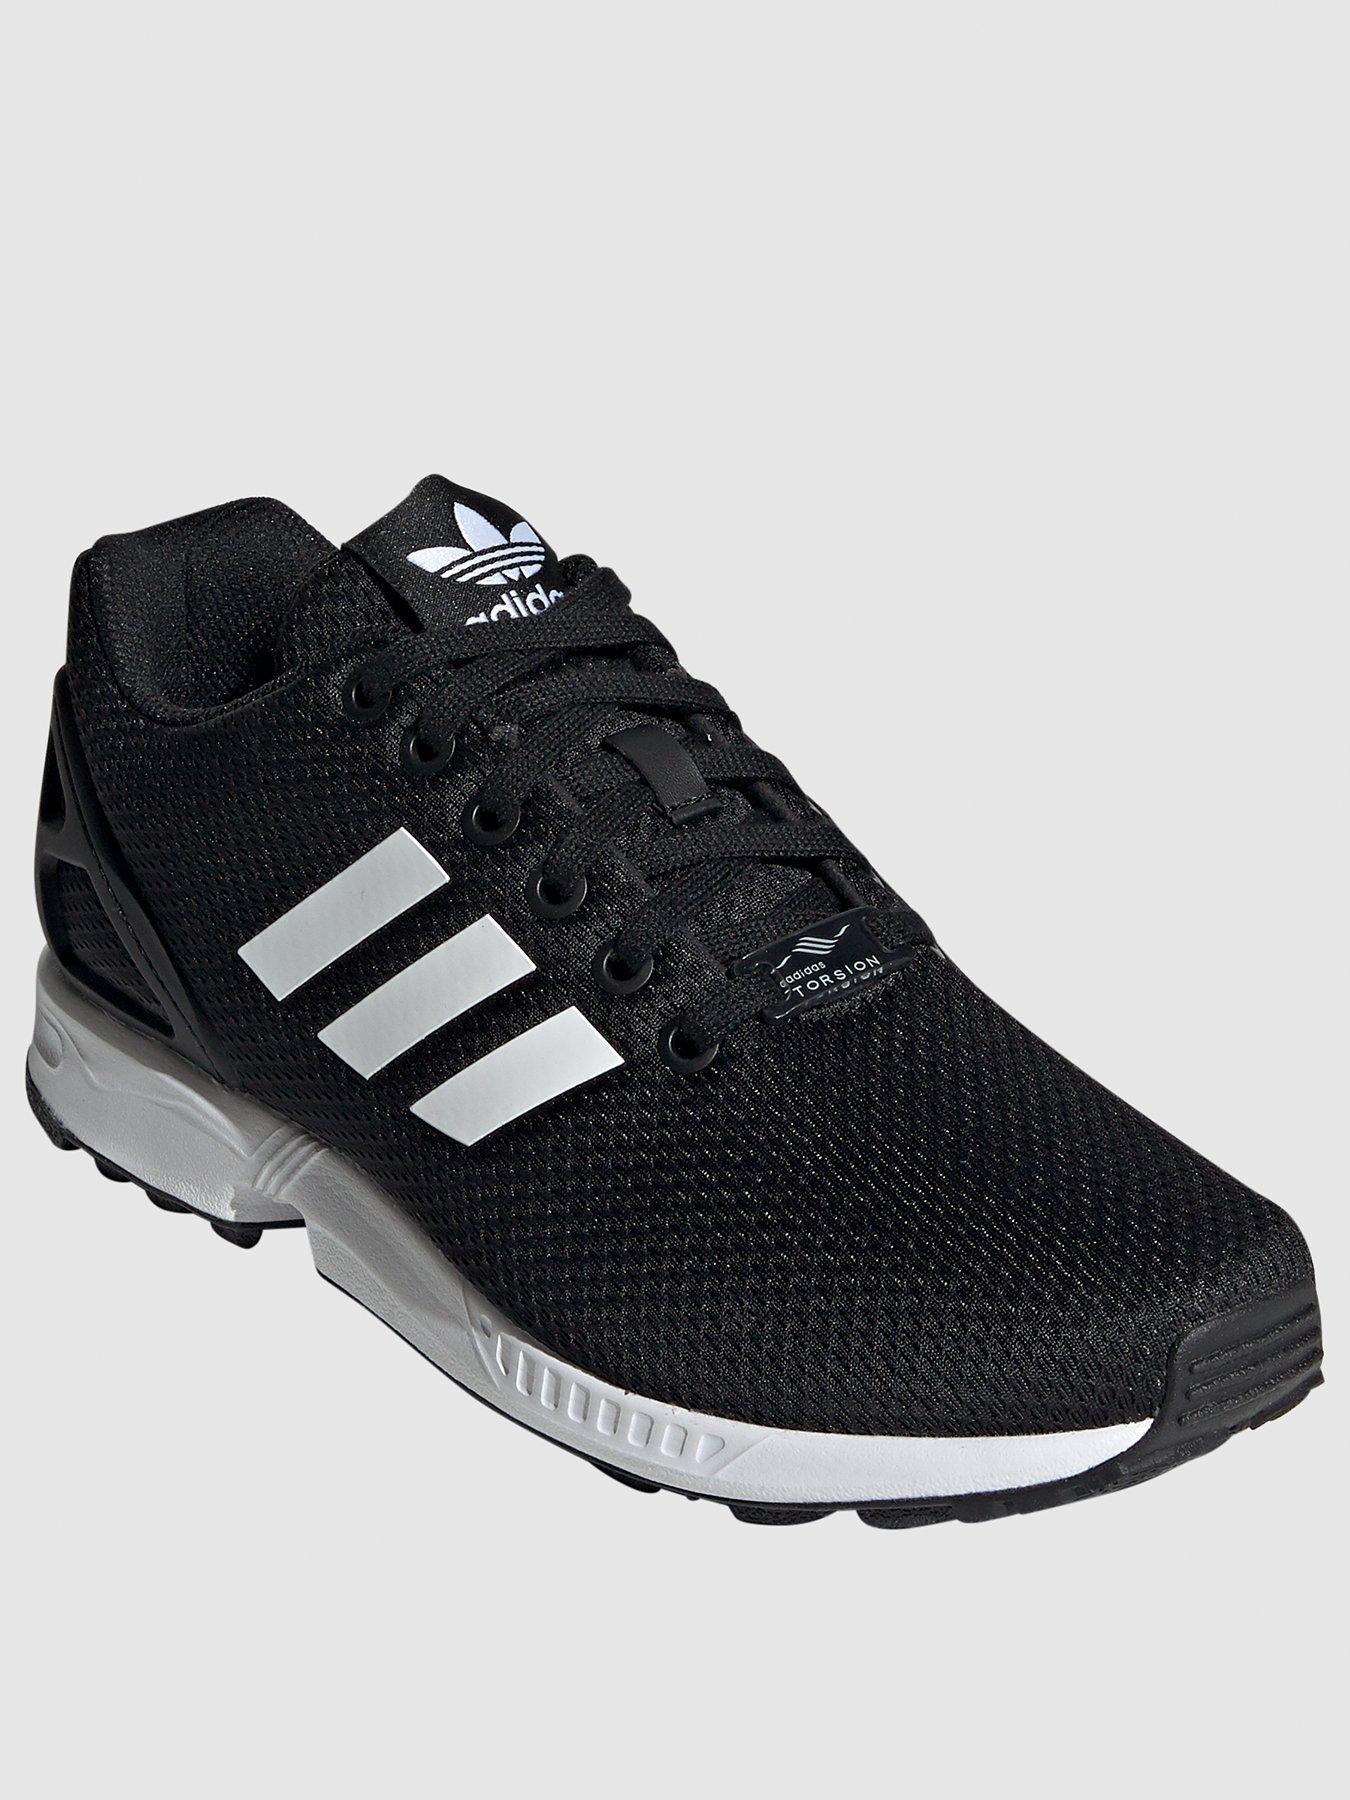 adidas zx flux unisex adults trainers